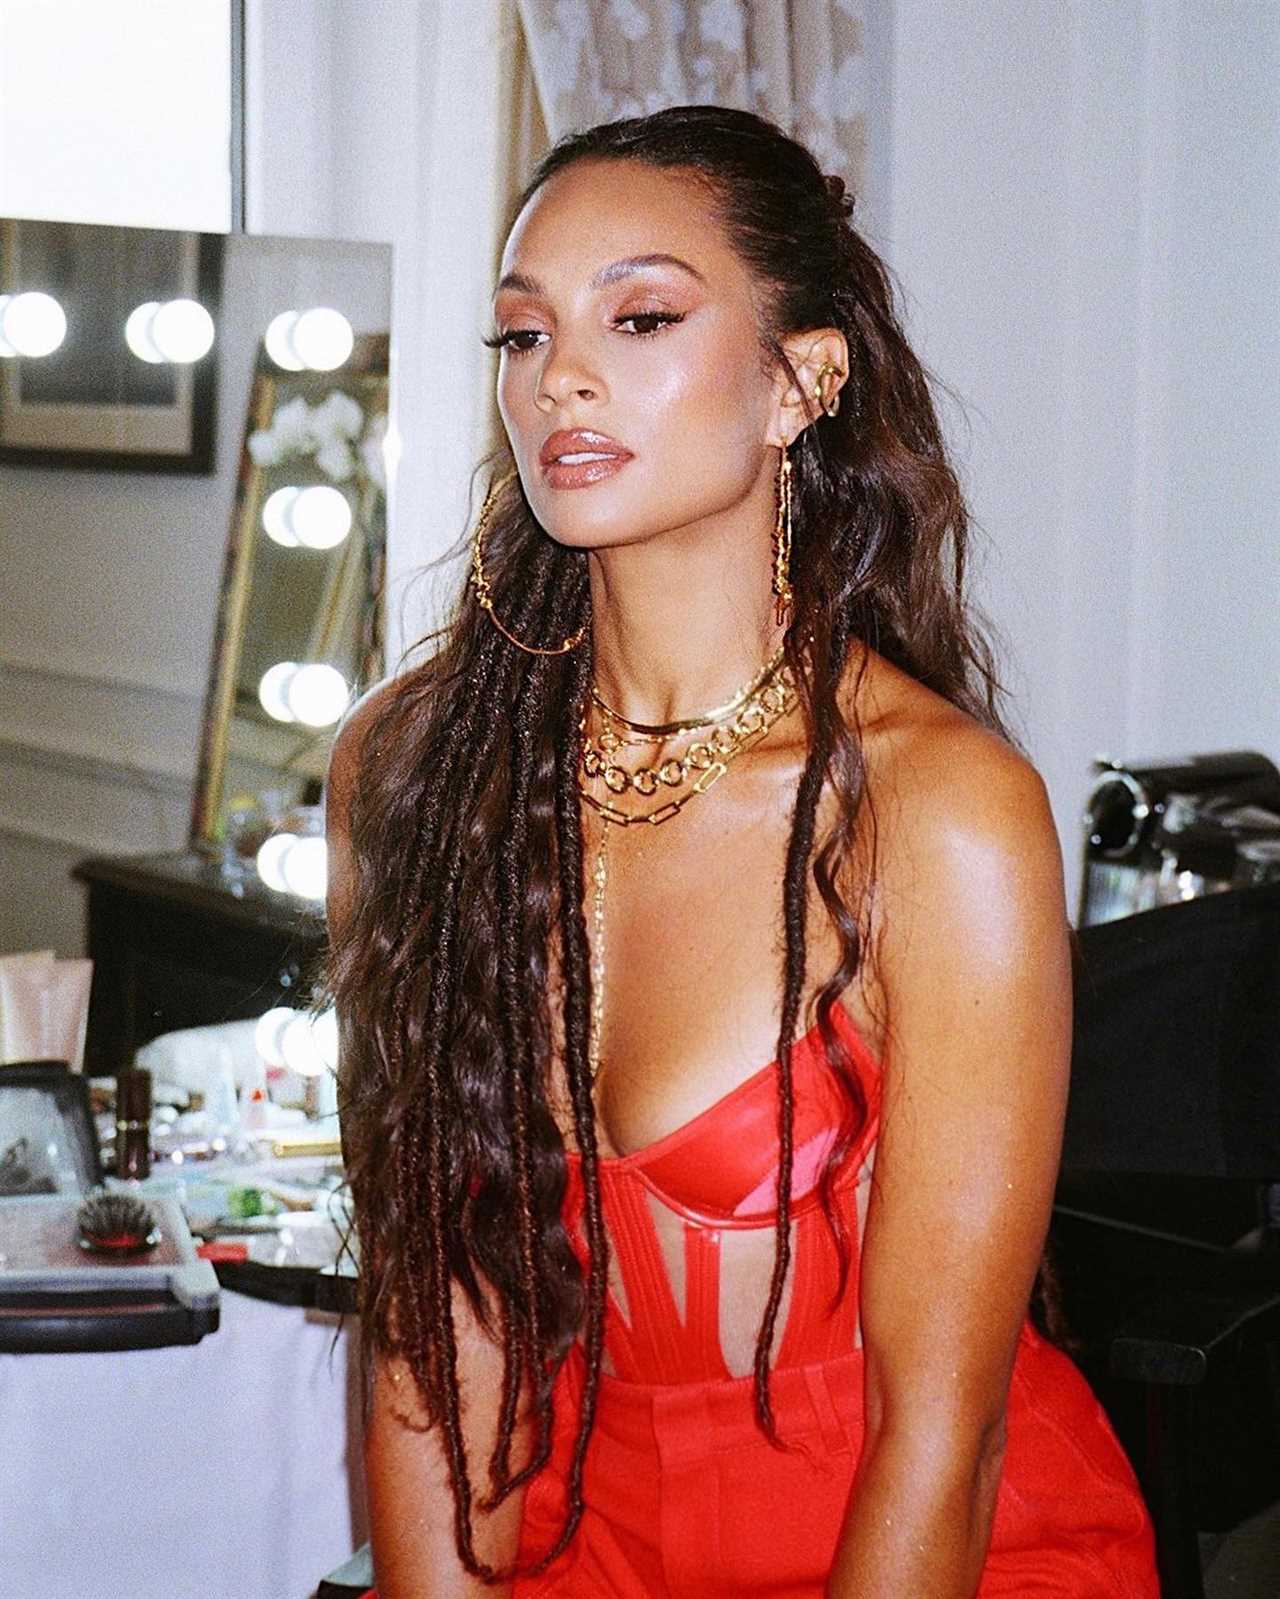 Alesha Dixon sizzles in a red cut-out corset as Britain’s Got Talent returns